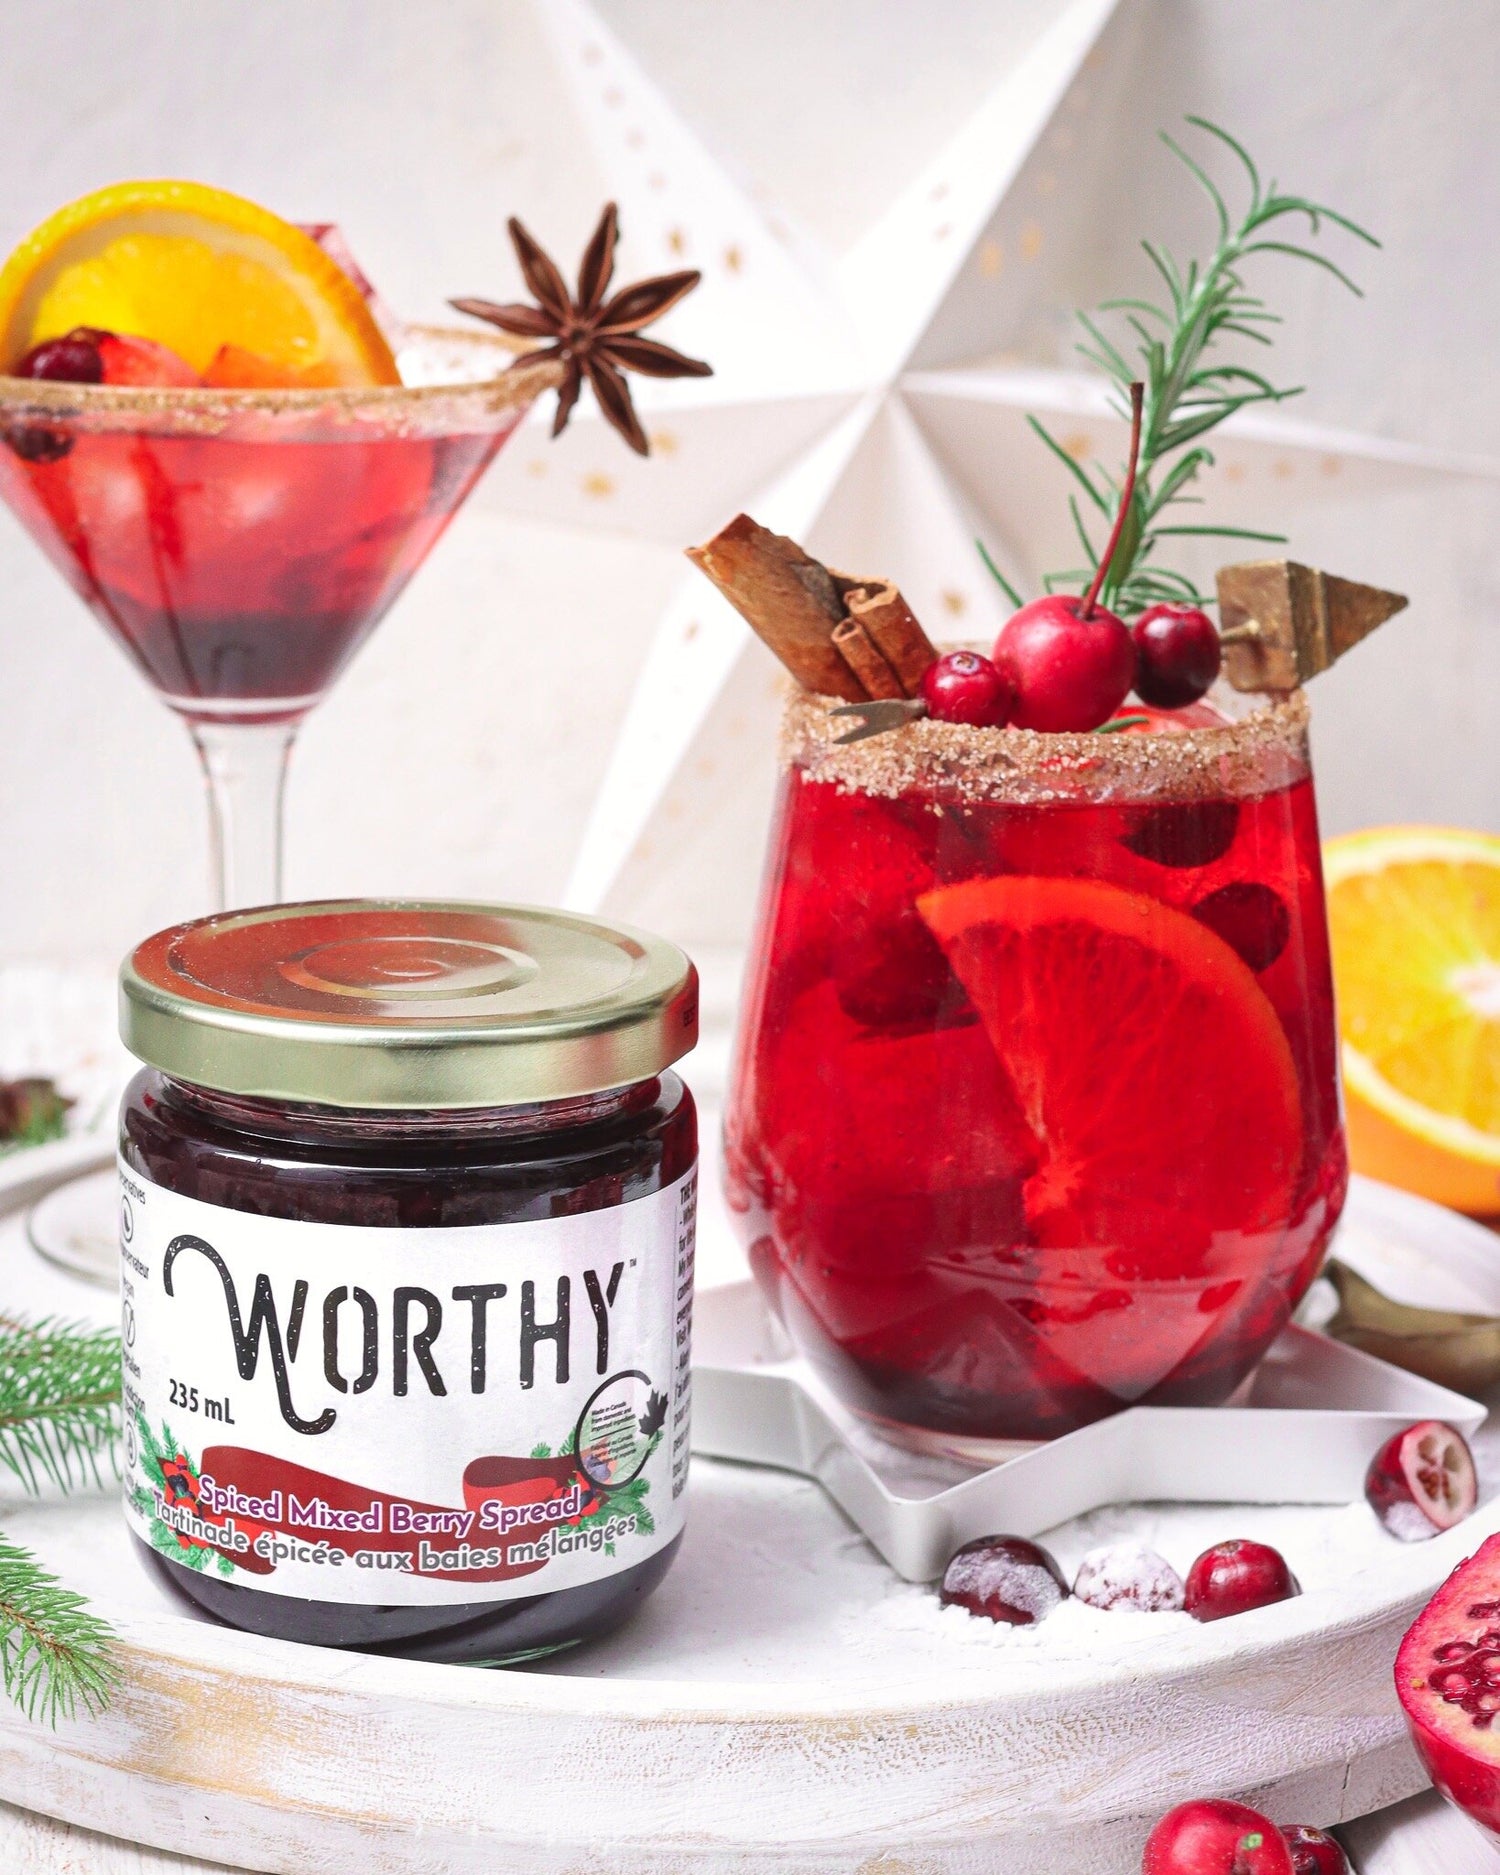 Pomegranate and berry mocktail with a cinnamon sugar rim topped with fruit and spices made with Worthy’s Spiced Mixed Berry spread in a Christmas setting.